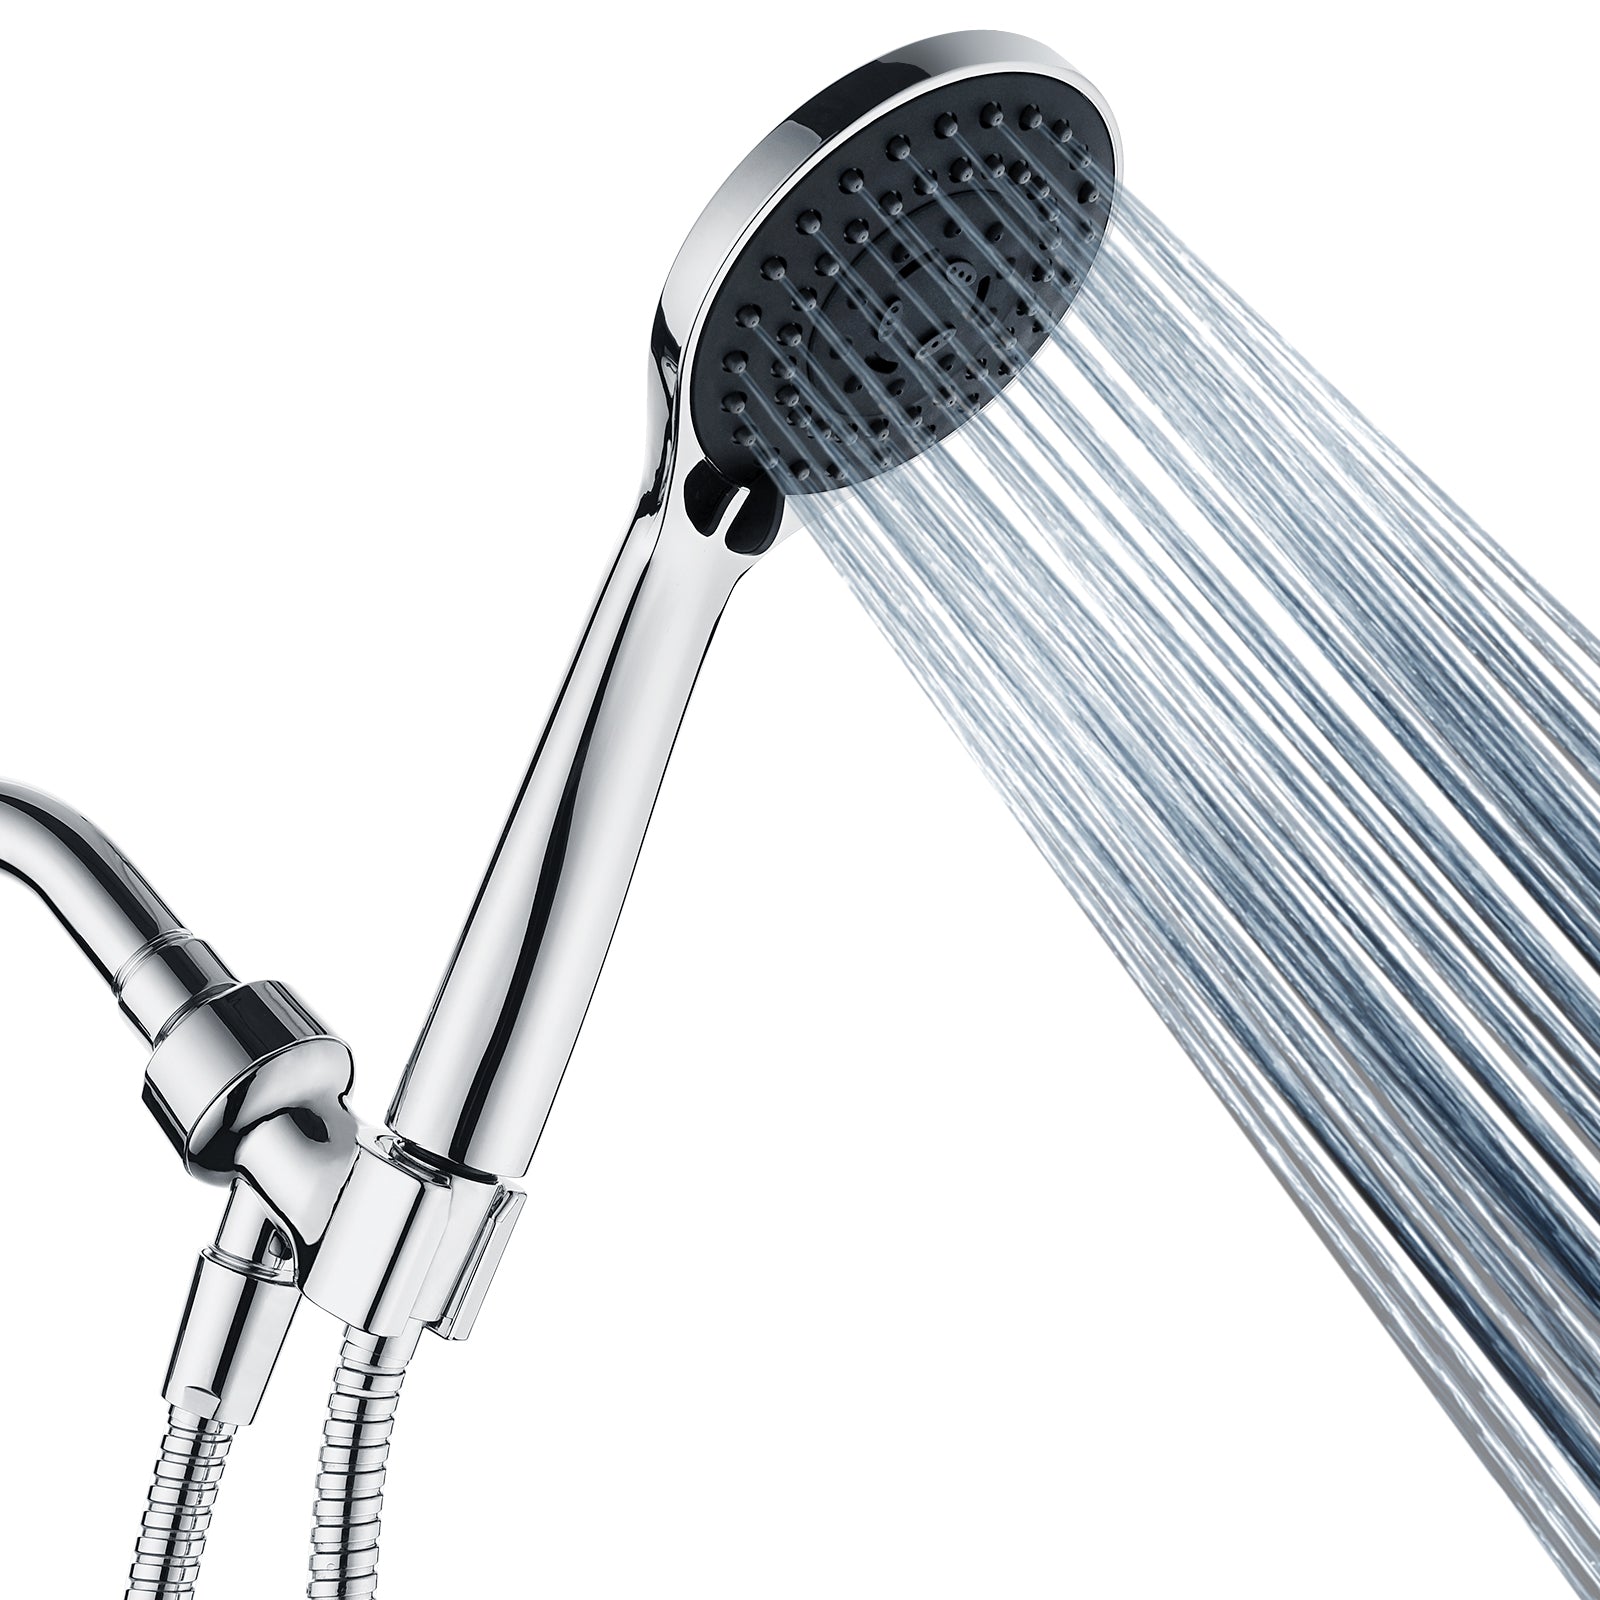 BRIGHT SHOWERS 5 Spray Settings Handheld Shower Head Kit, High Pressure  Handheld Rain Shower with 60 Inch Long Stainless Steel Shower Hose and